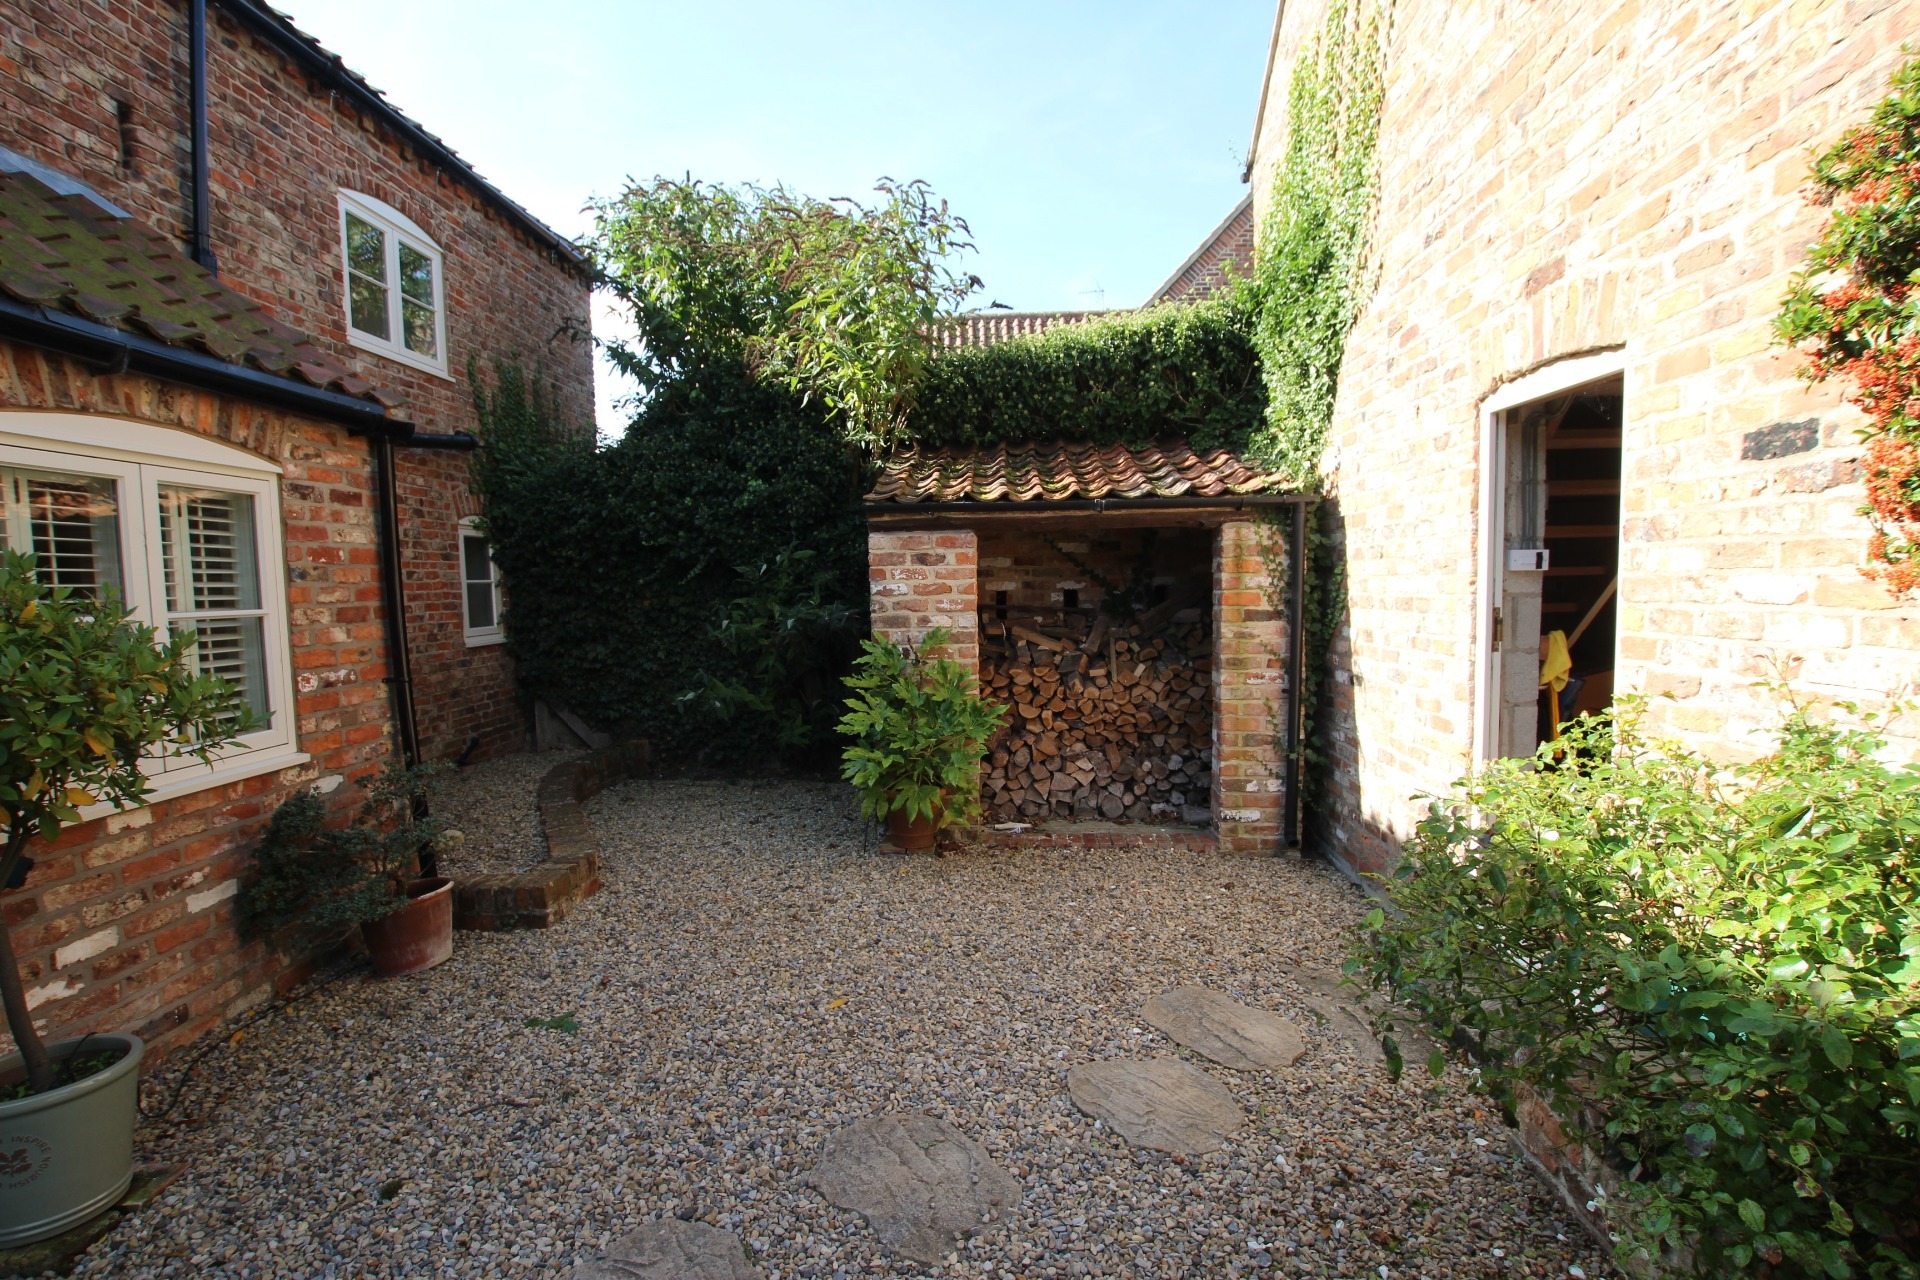 Gap between main house and outbuildings before constructing linking extension